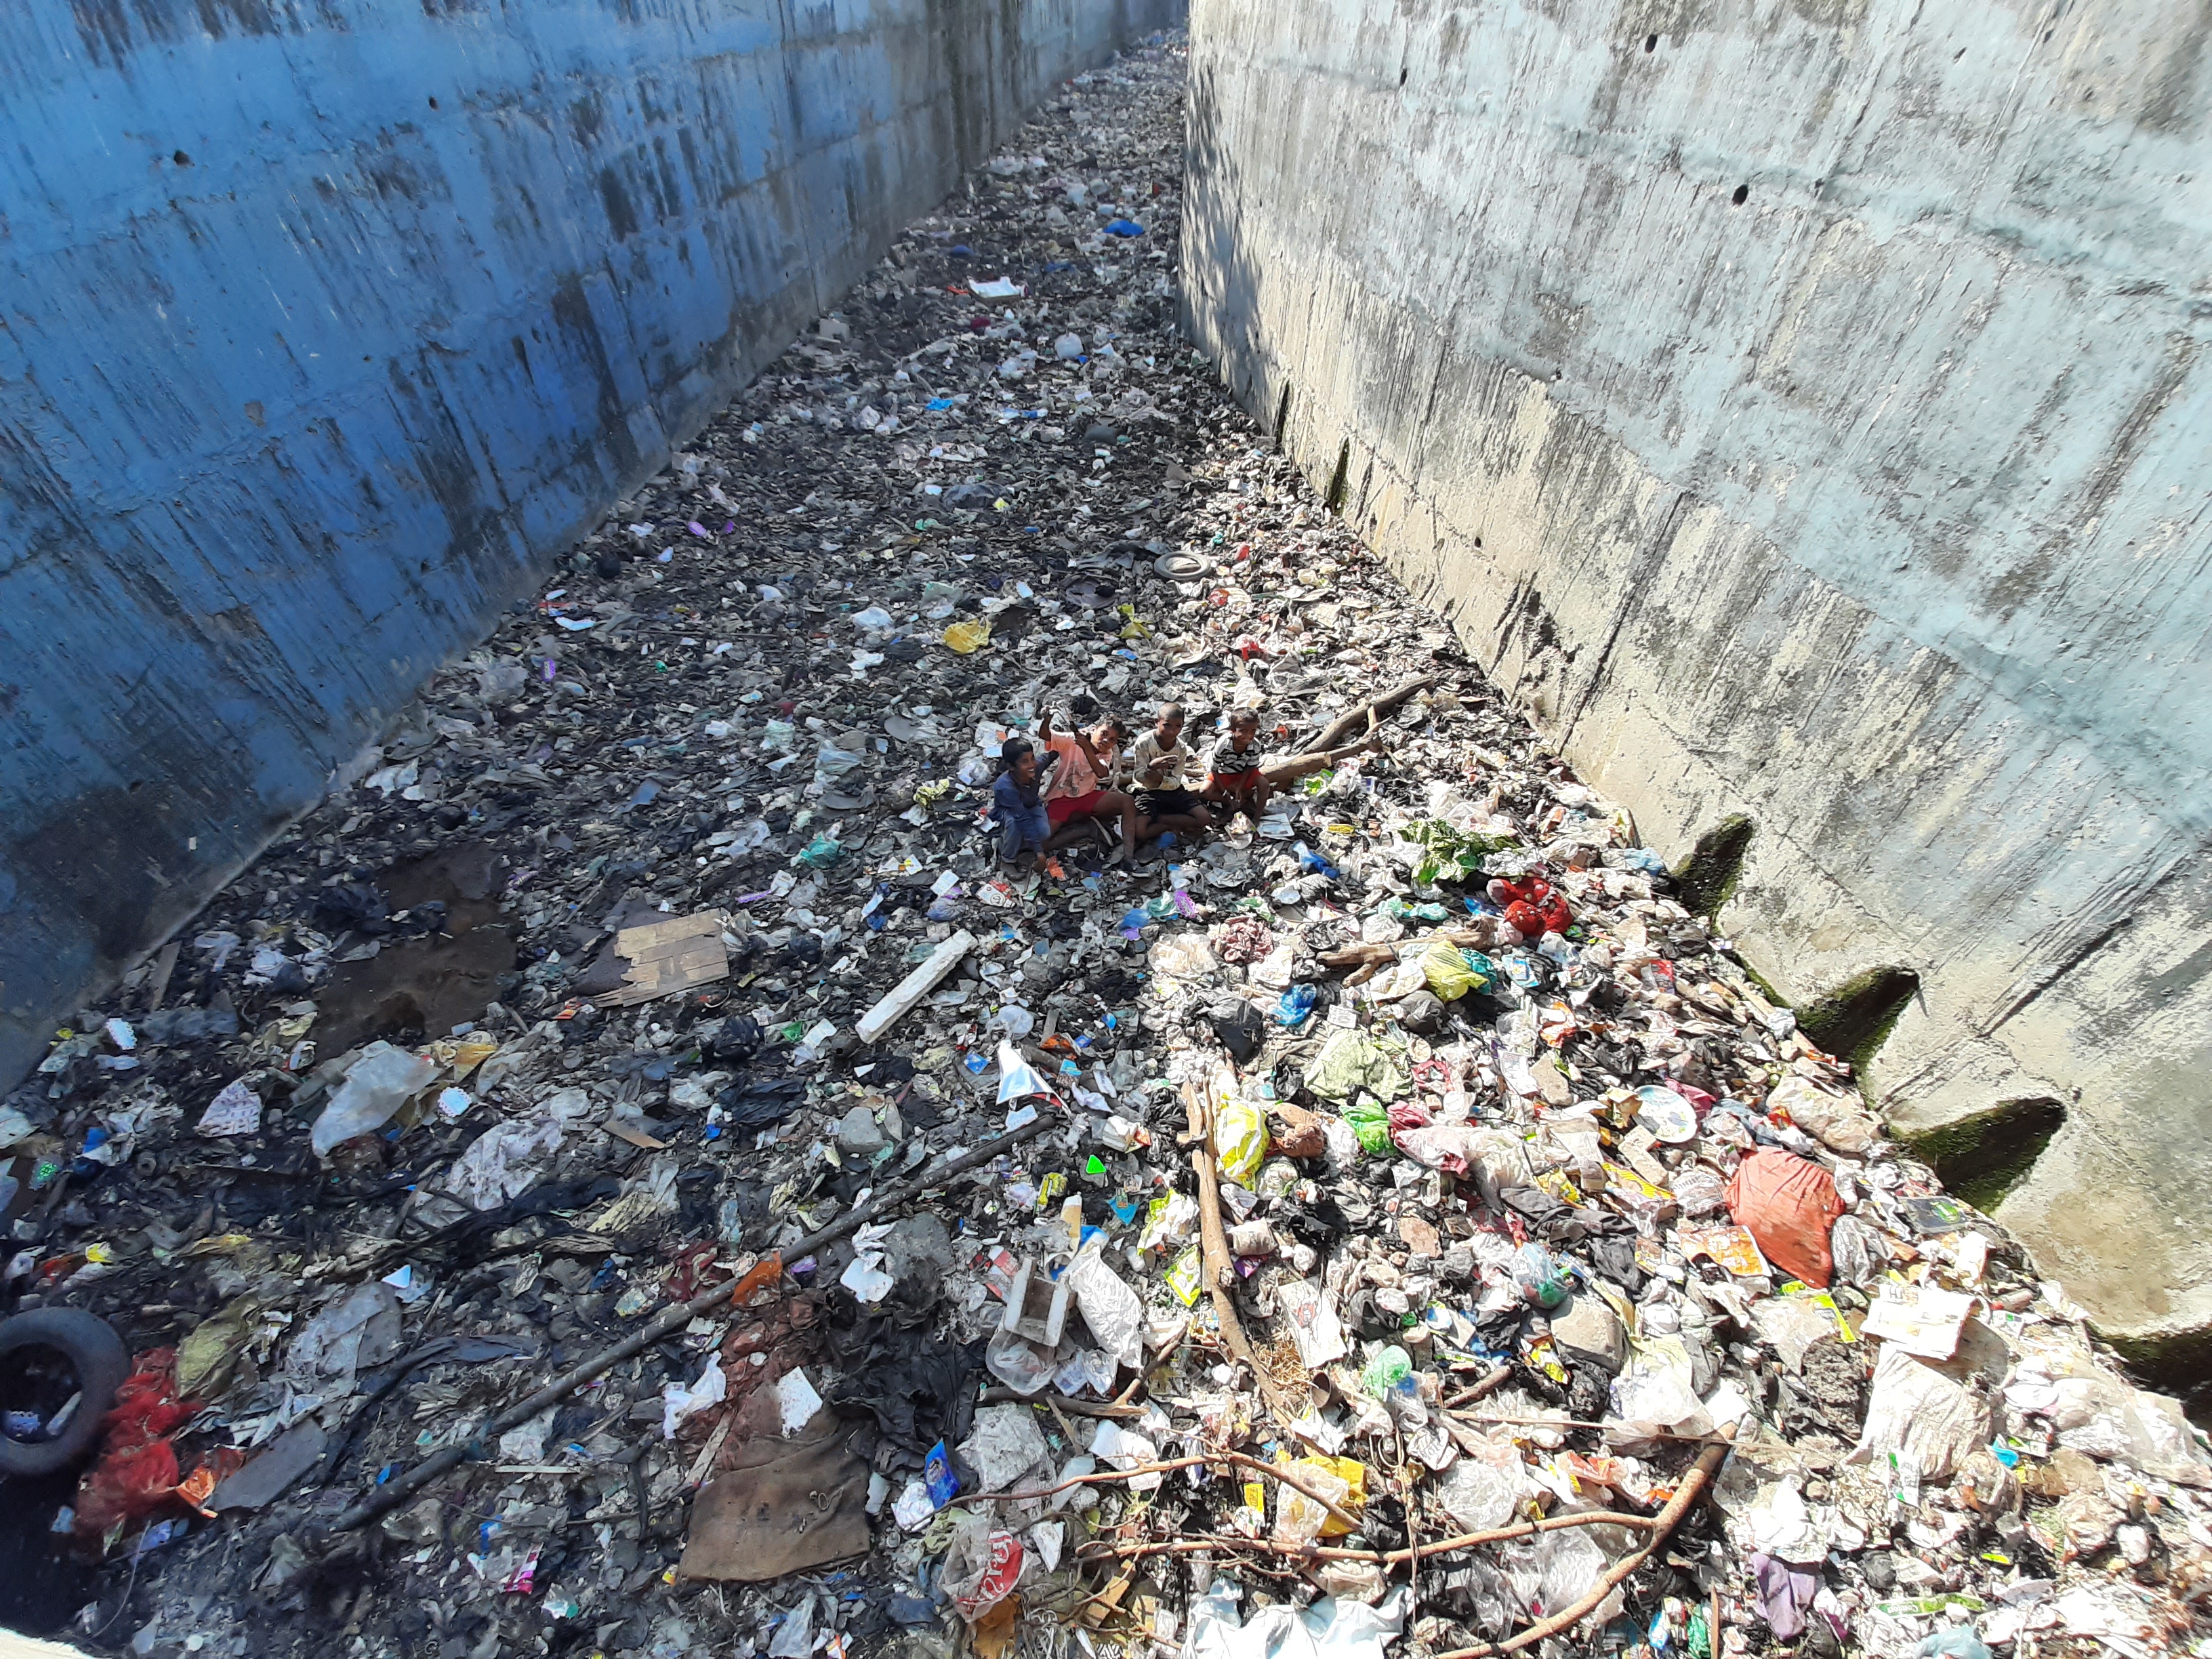 Doctoral candidate Adwaita Banerjee documents life surrounding a dumping ground in India